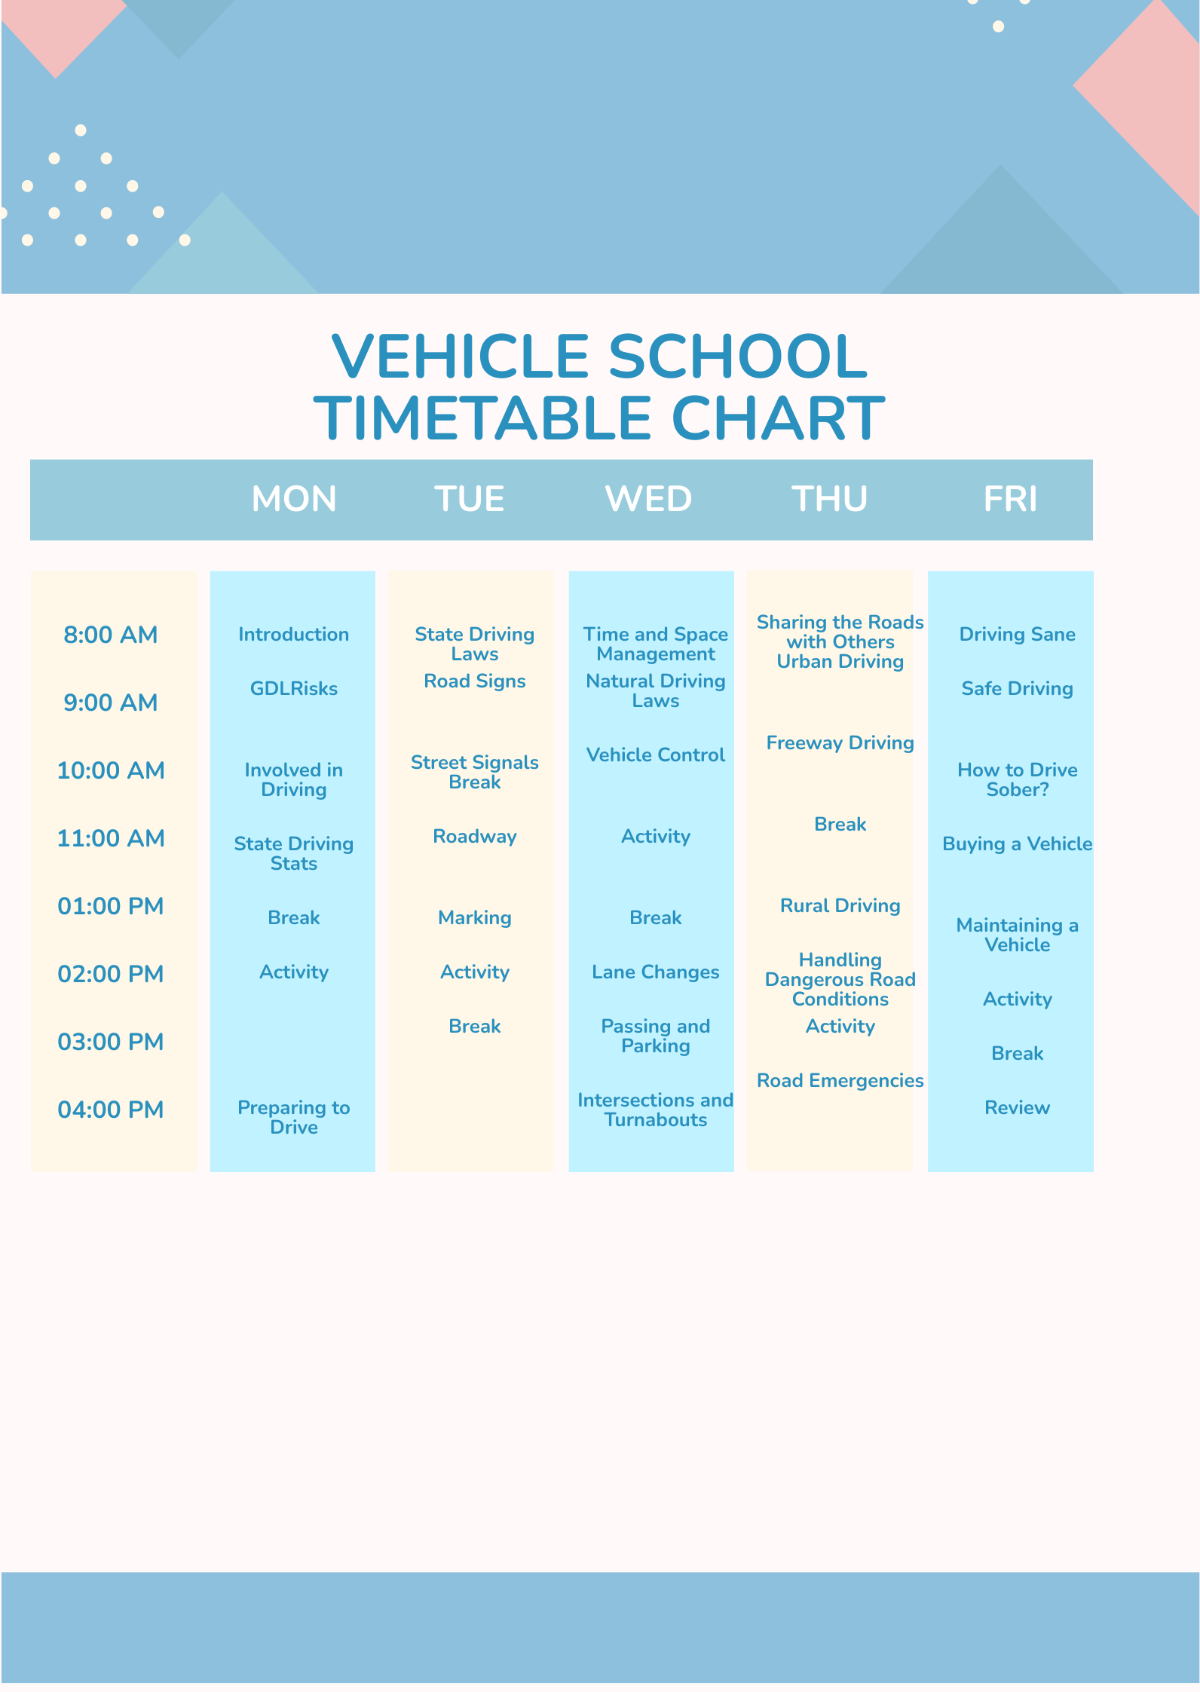 Vehicle School Timetable Chart Template